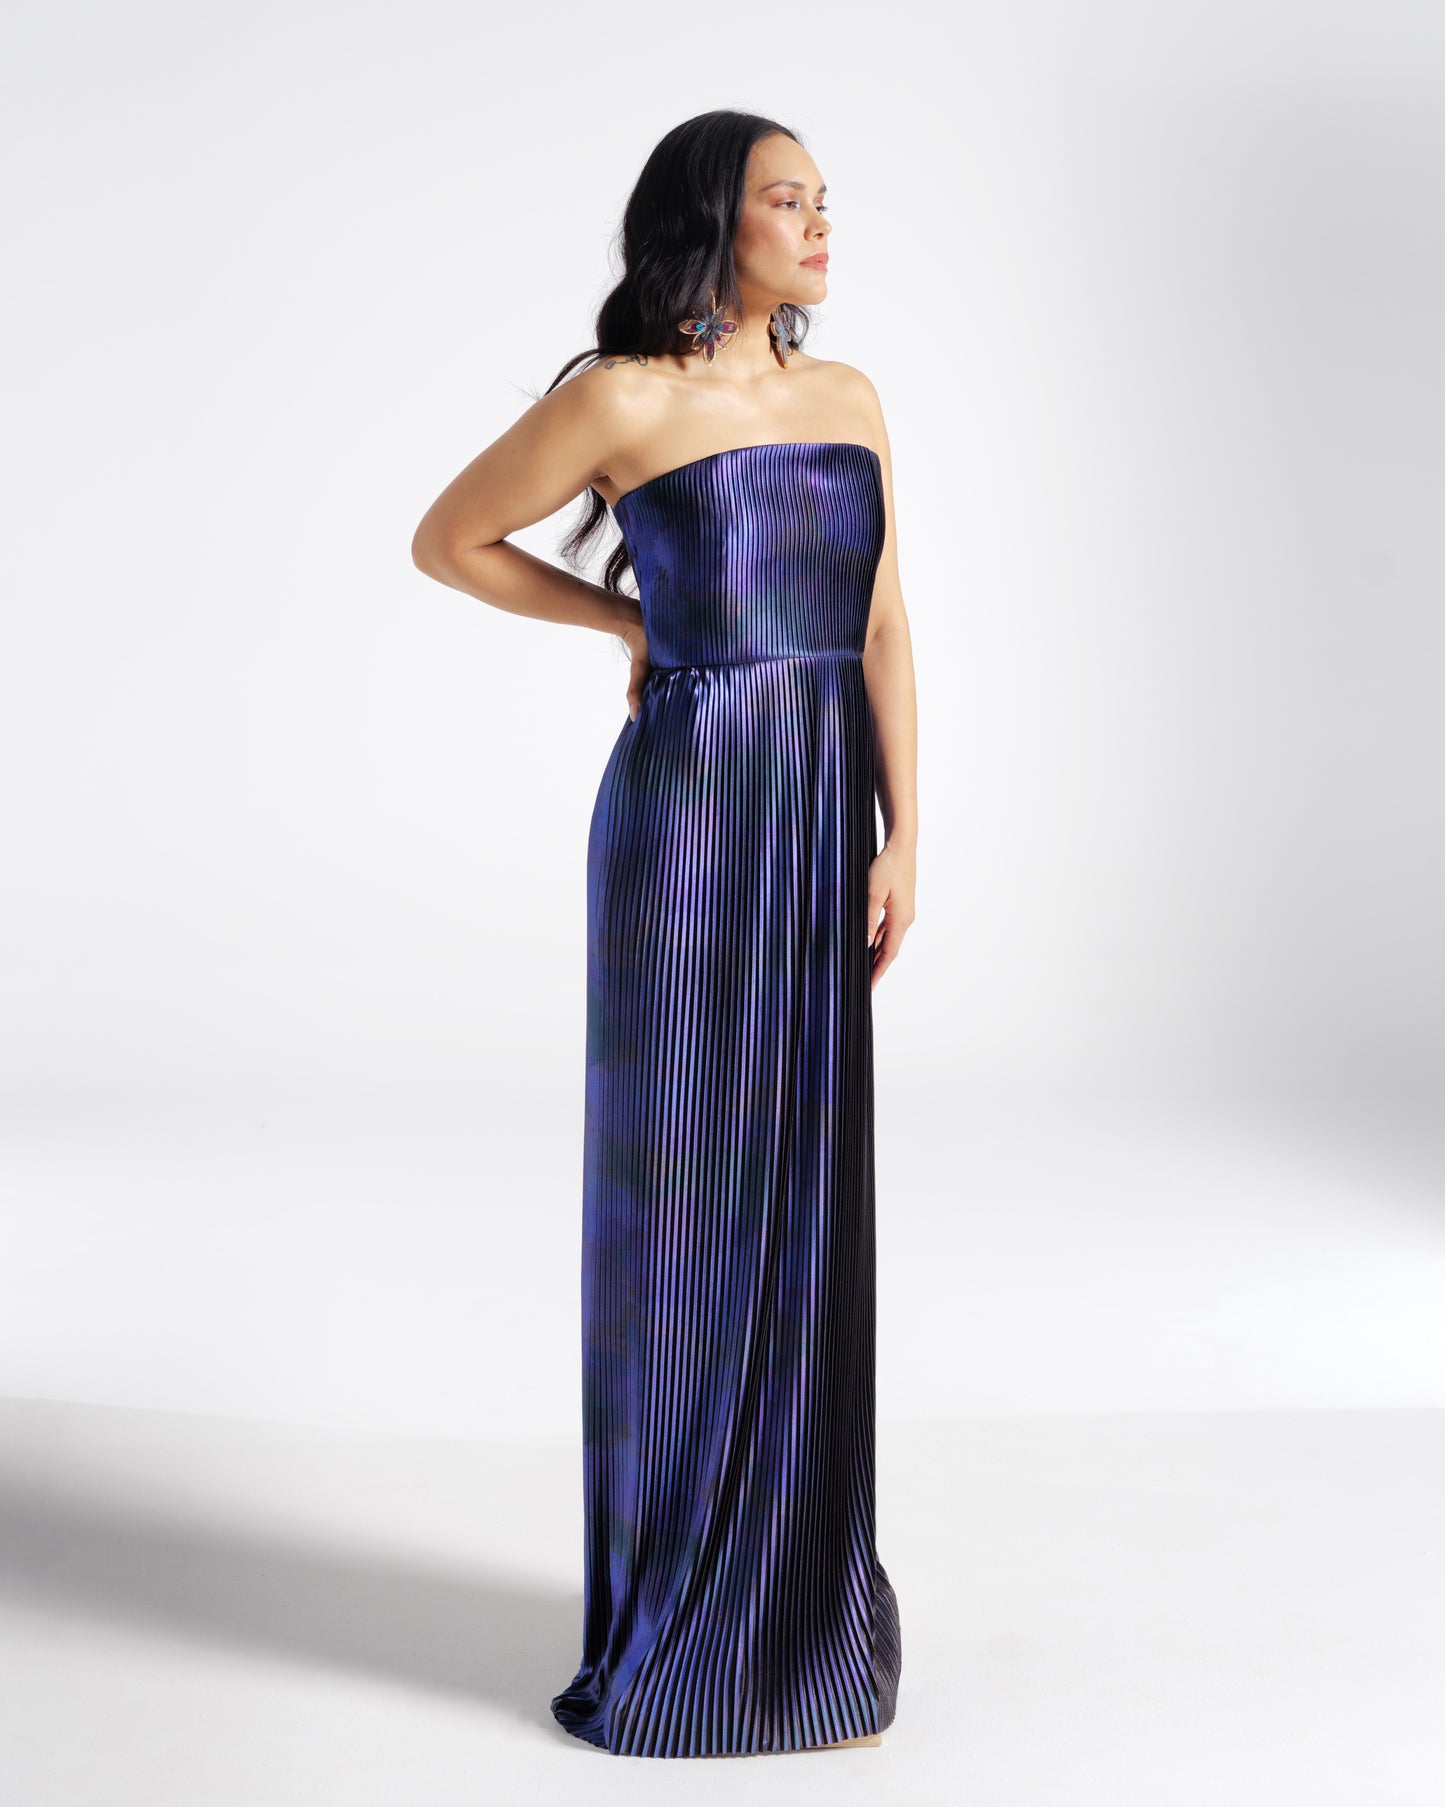 BUOYANT Strapless Gown